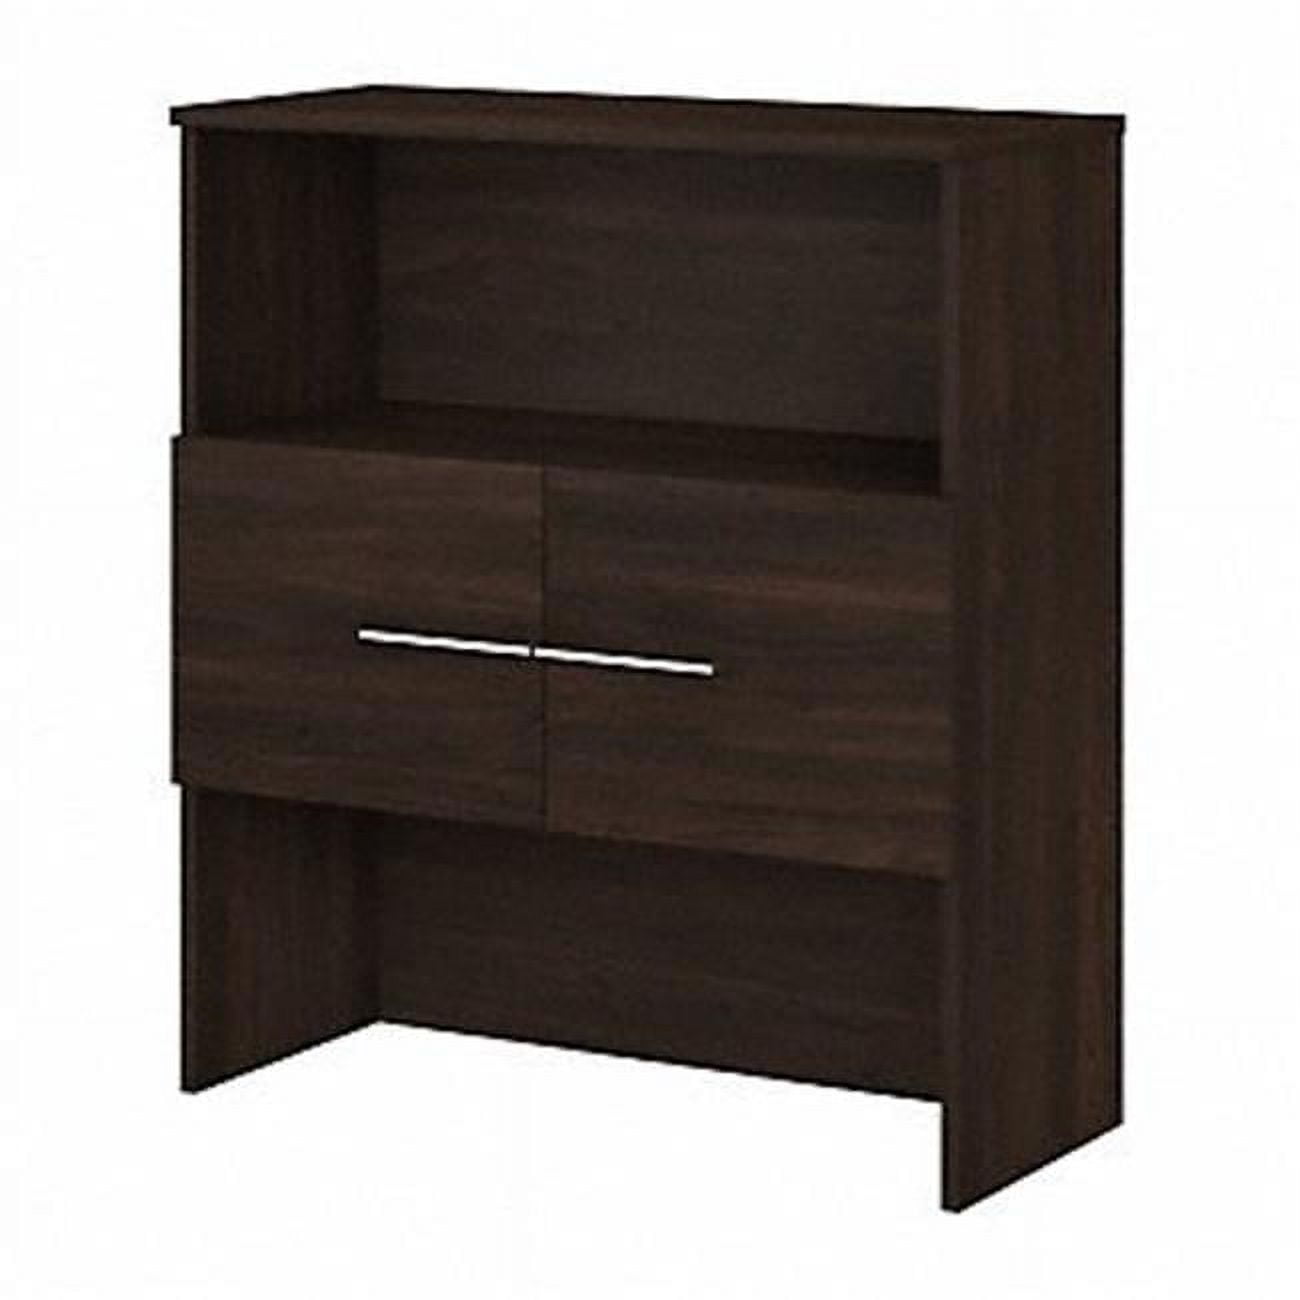 Picture of Bush Business Furniture OFH136BW Office 500 Bookcase Hutch - Black Walnut